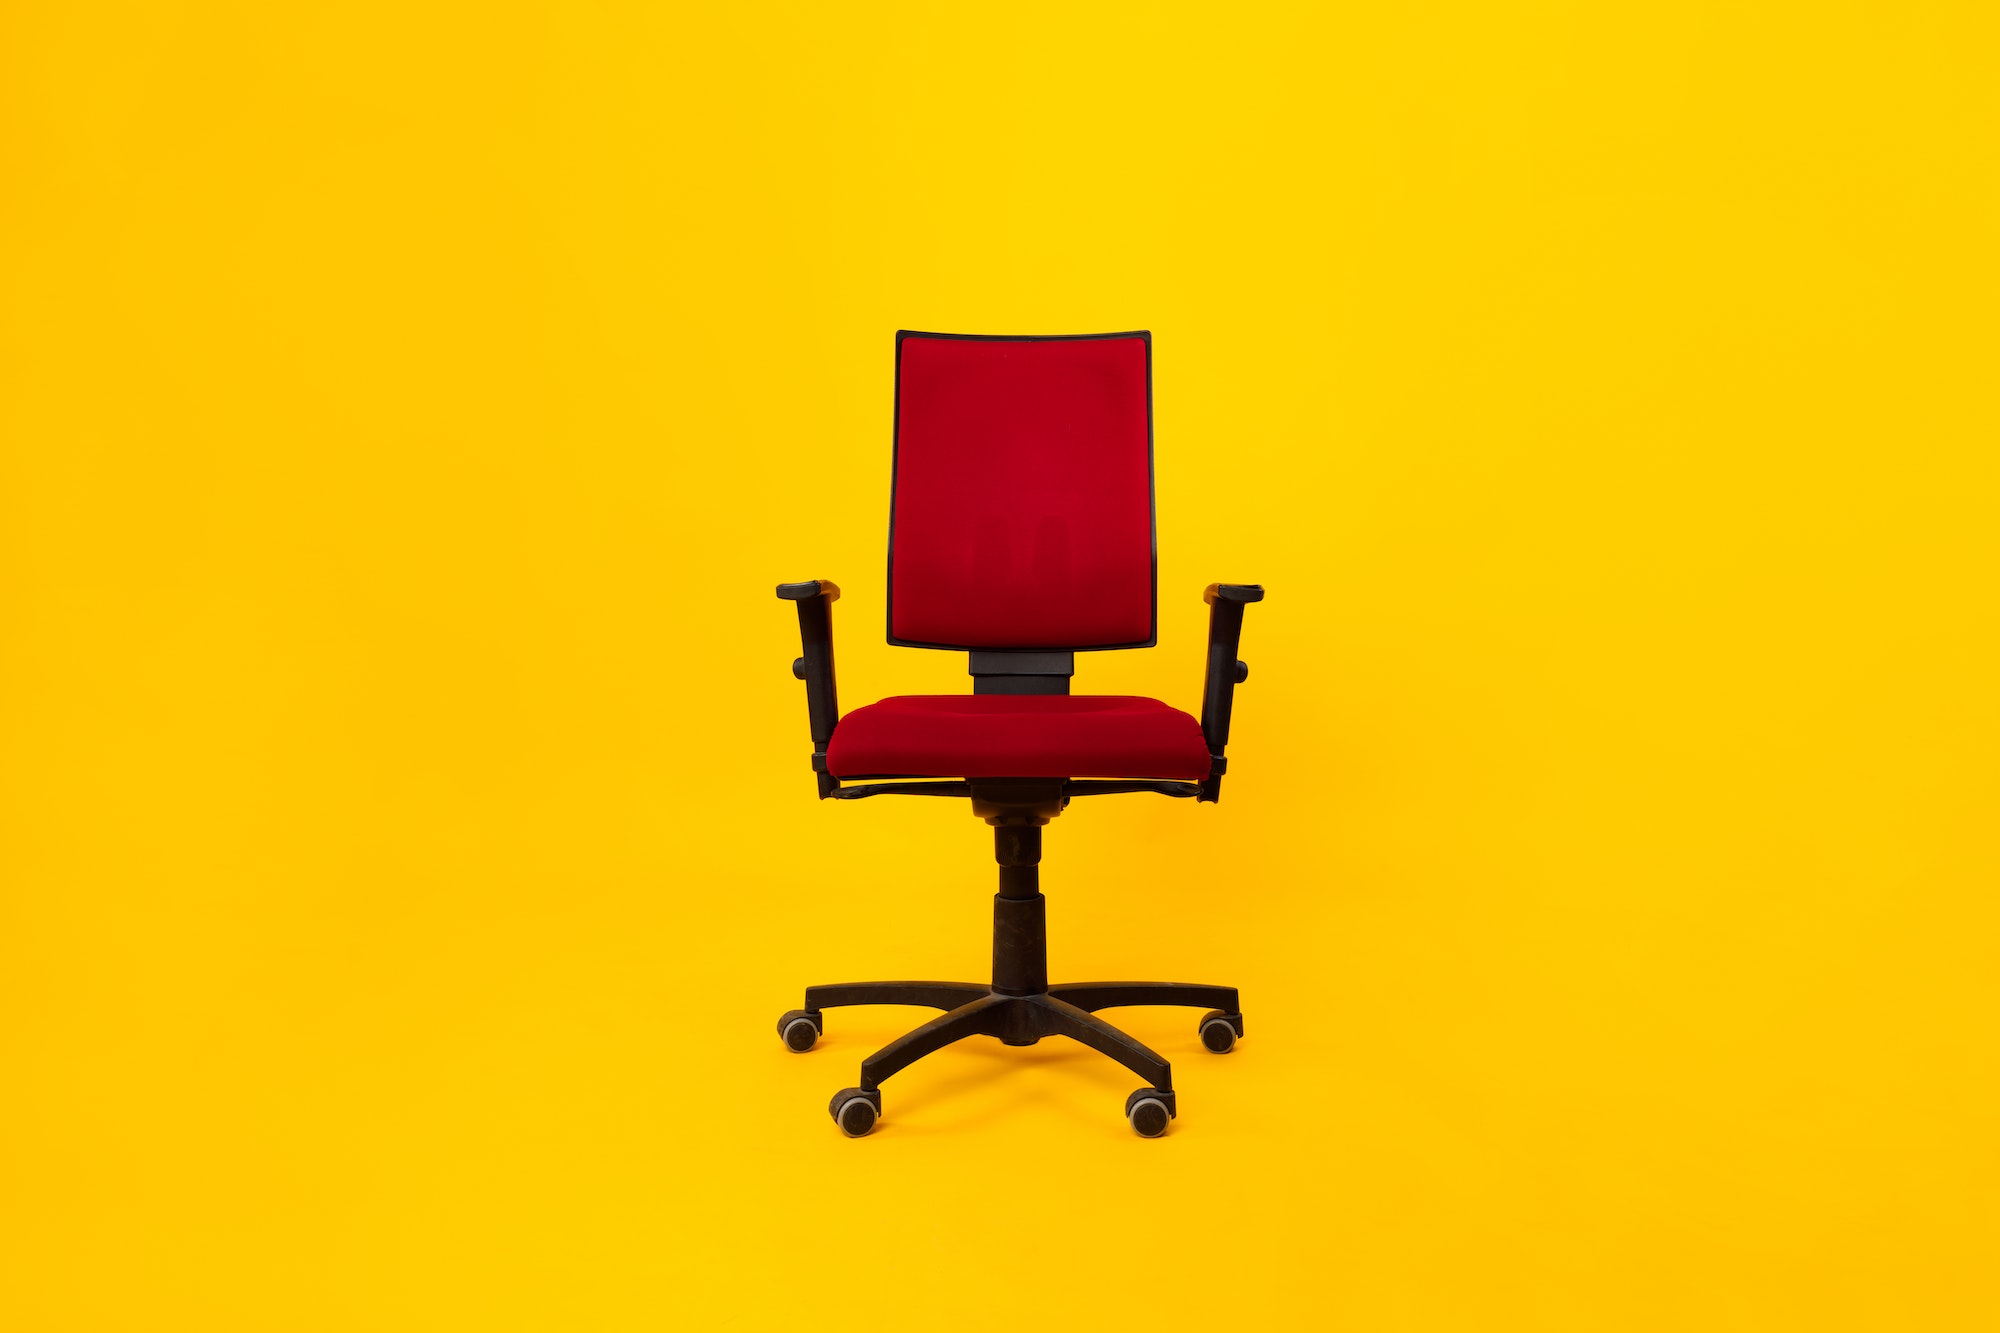 Front View Of Red Adjustable Office Chair Over Yellow Background